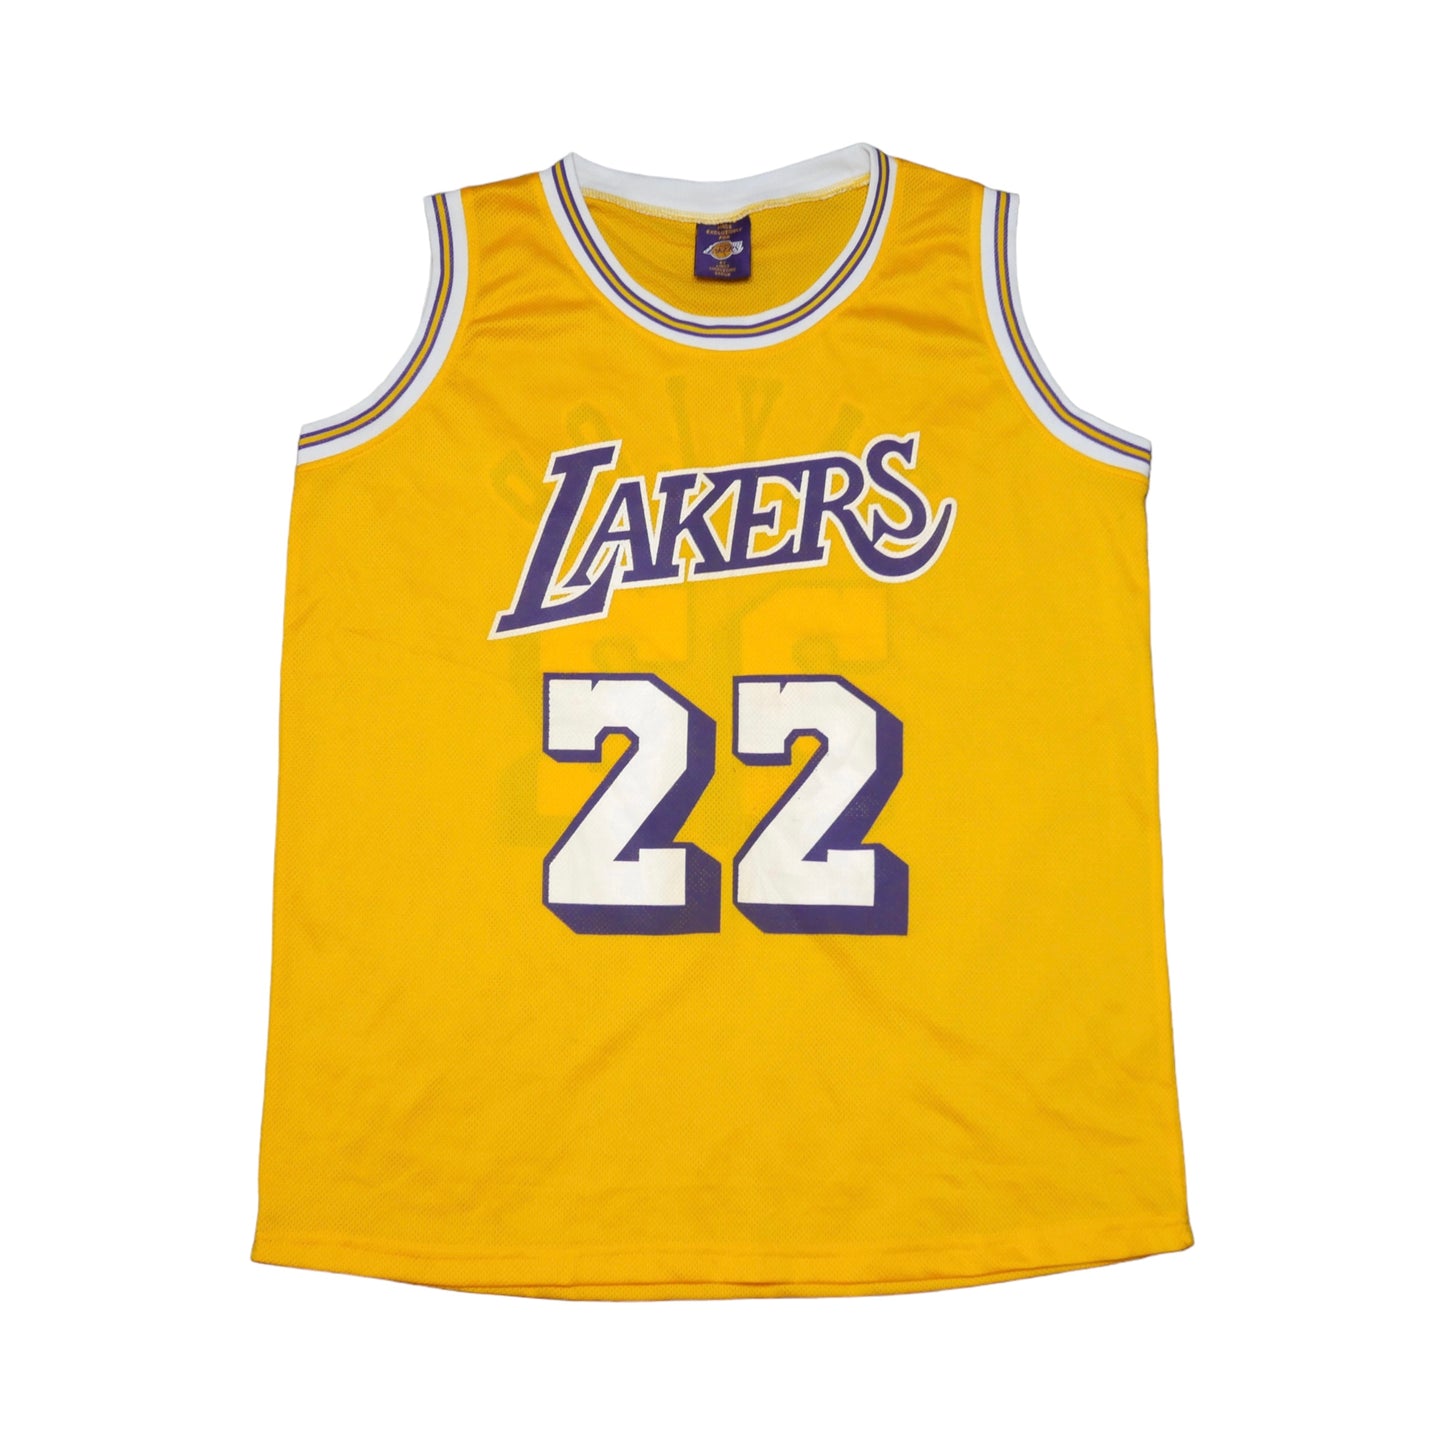 Los Angeles Lakers Baylor Jersey - XL